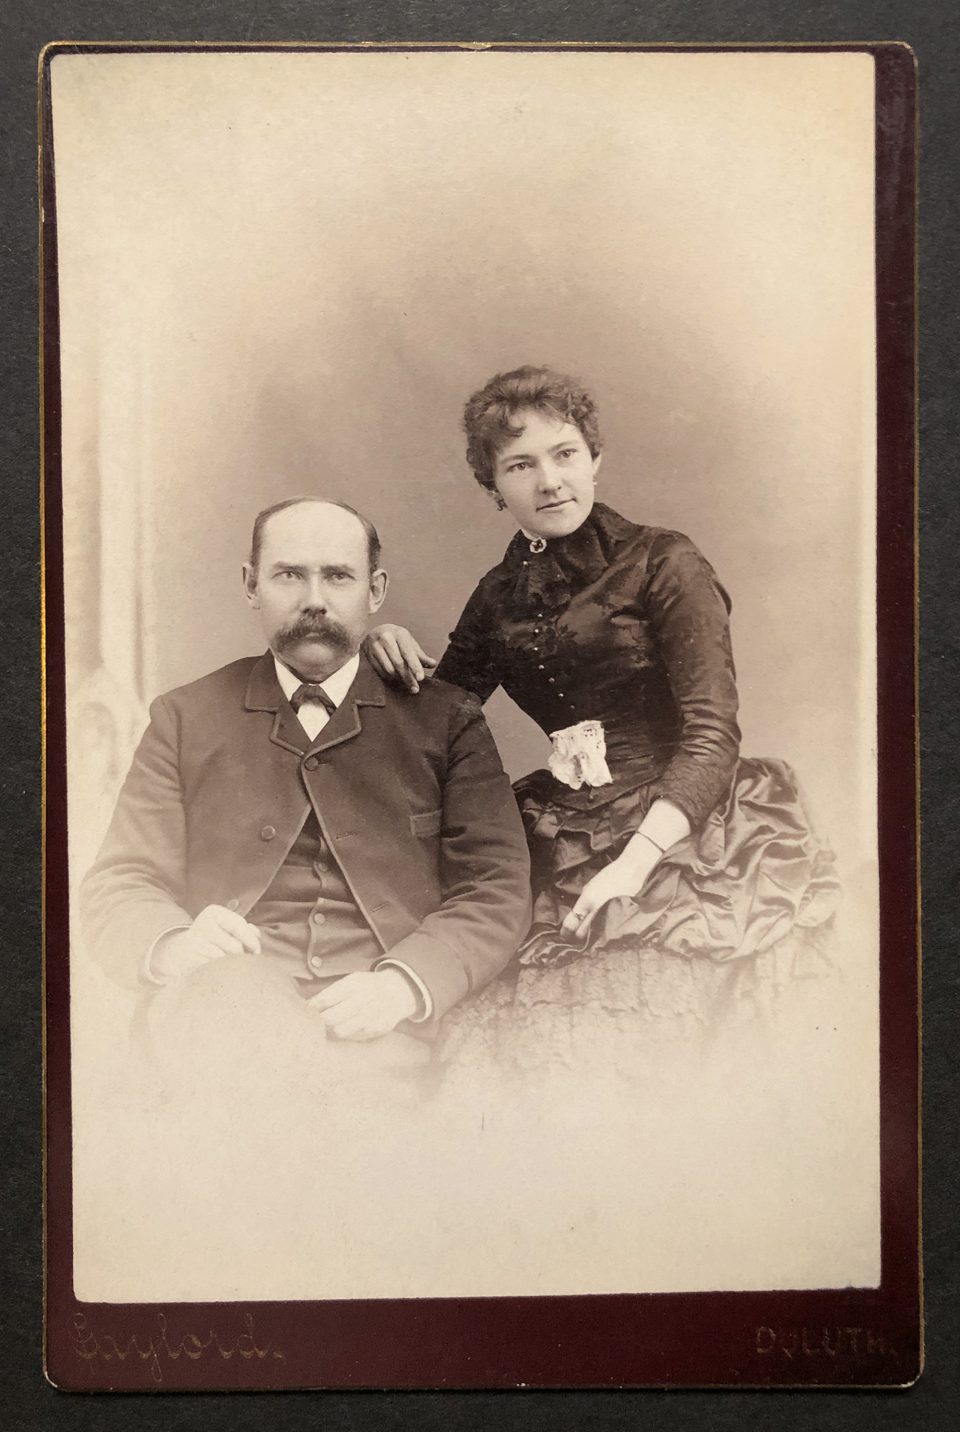 Cabinet card portrait of a couple by the Gaylord Studio in Duluth, possibly 1880s.